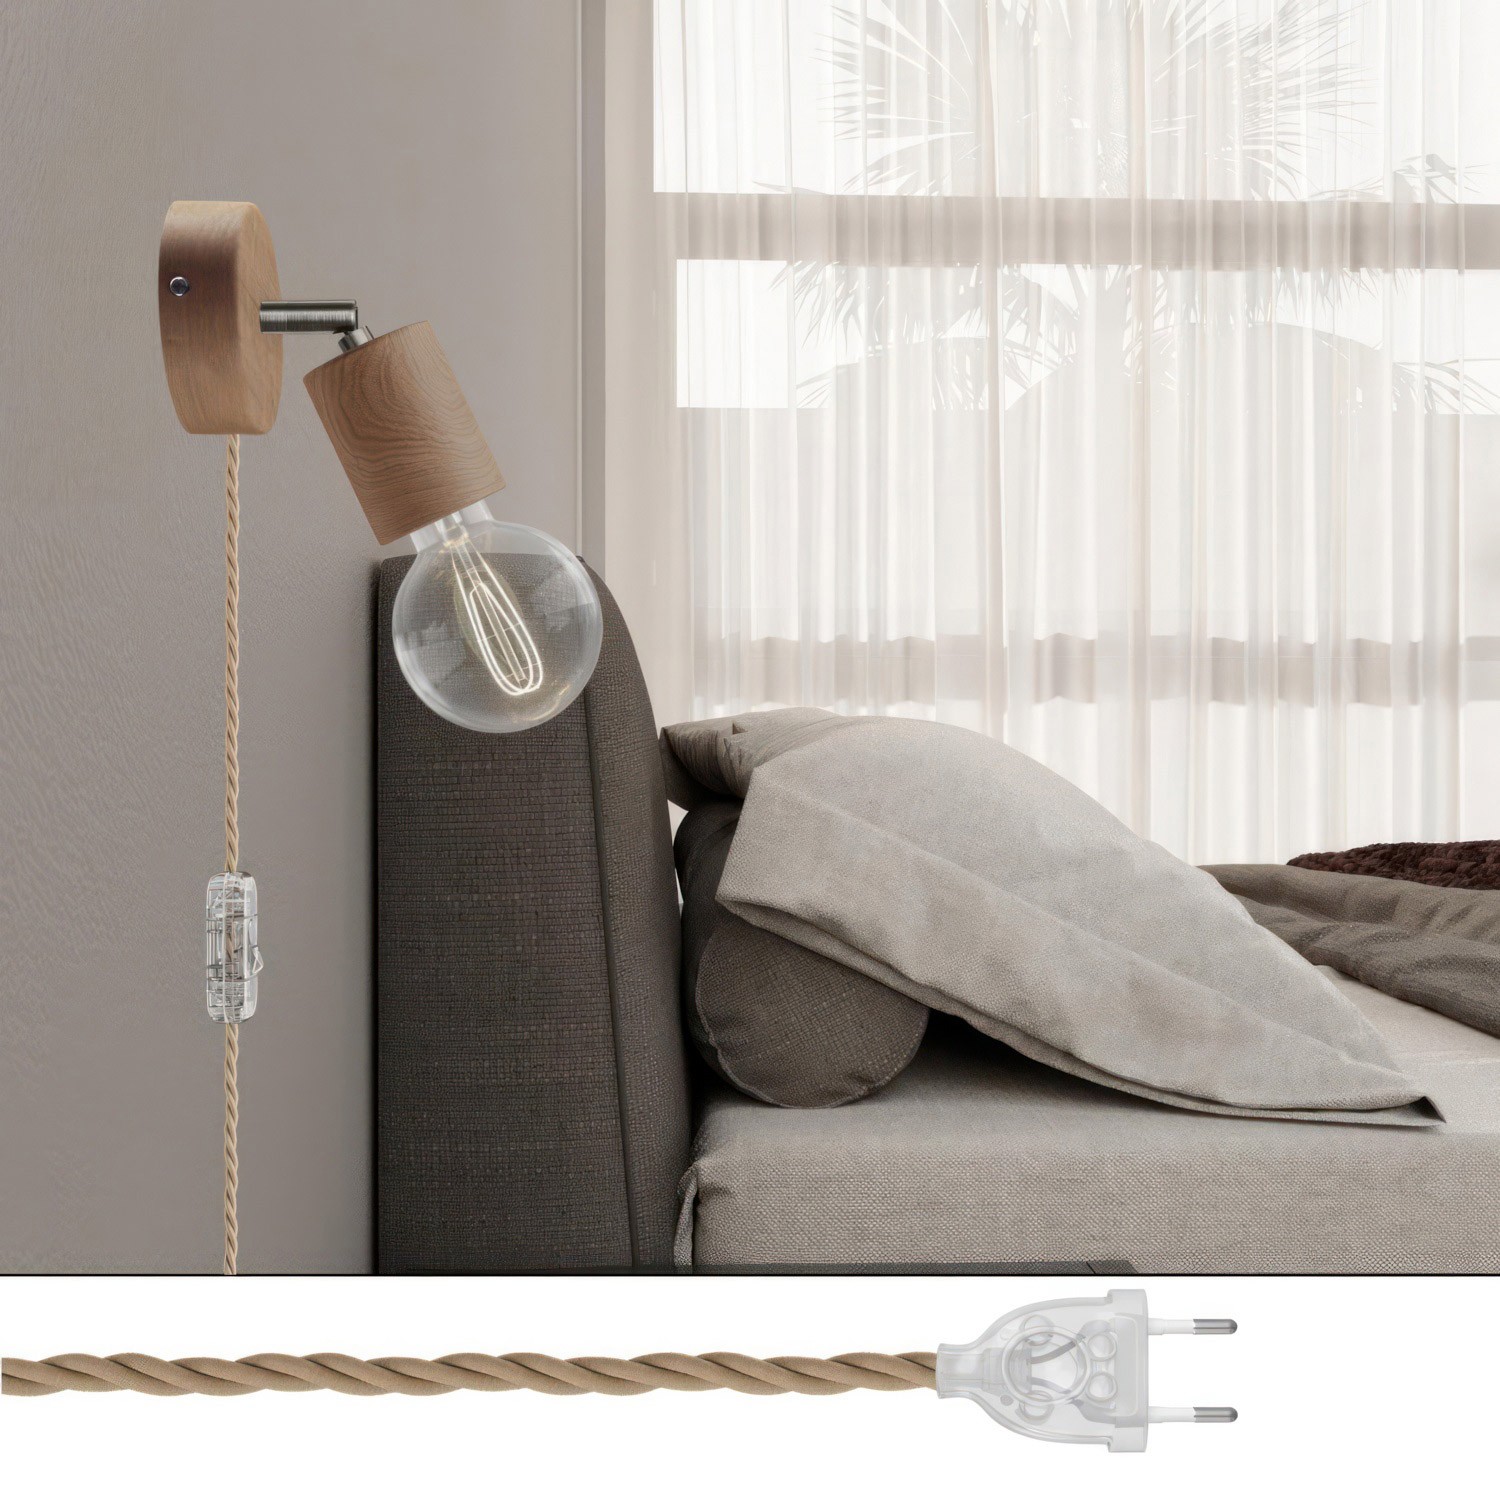 Spostaluce Lamp adjustable wooden Joint with two-pin plug